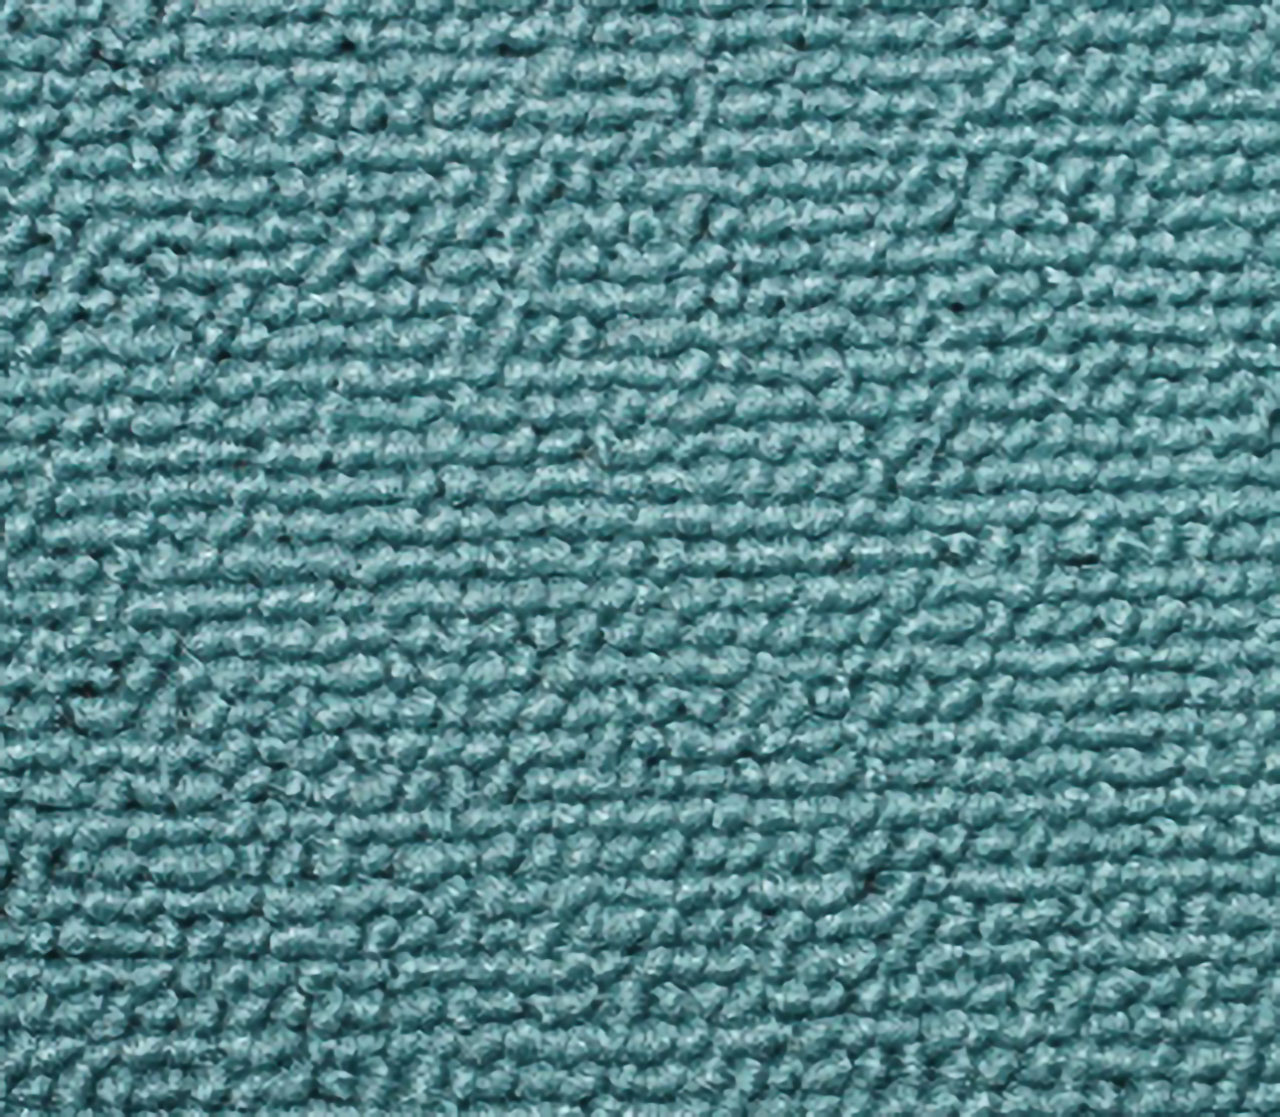 Holden Special EJ Special Sedan B13 Monaco & Geisha Turquoise with Feathertop Grey Carpet (Image 1 of 1)